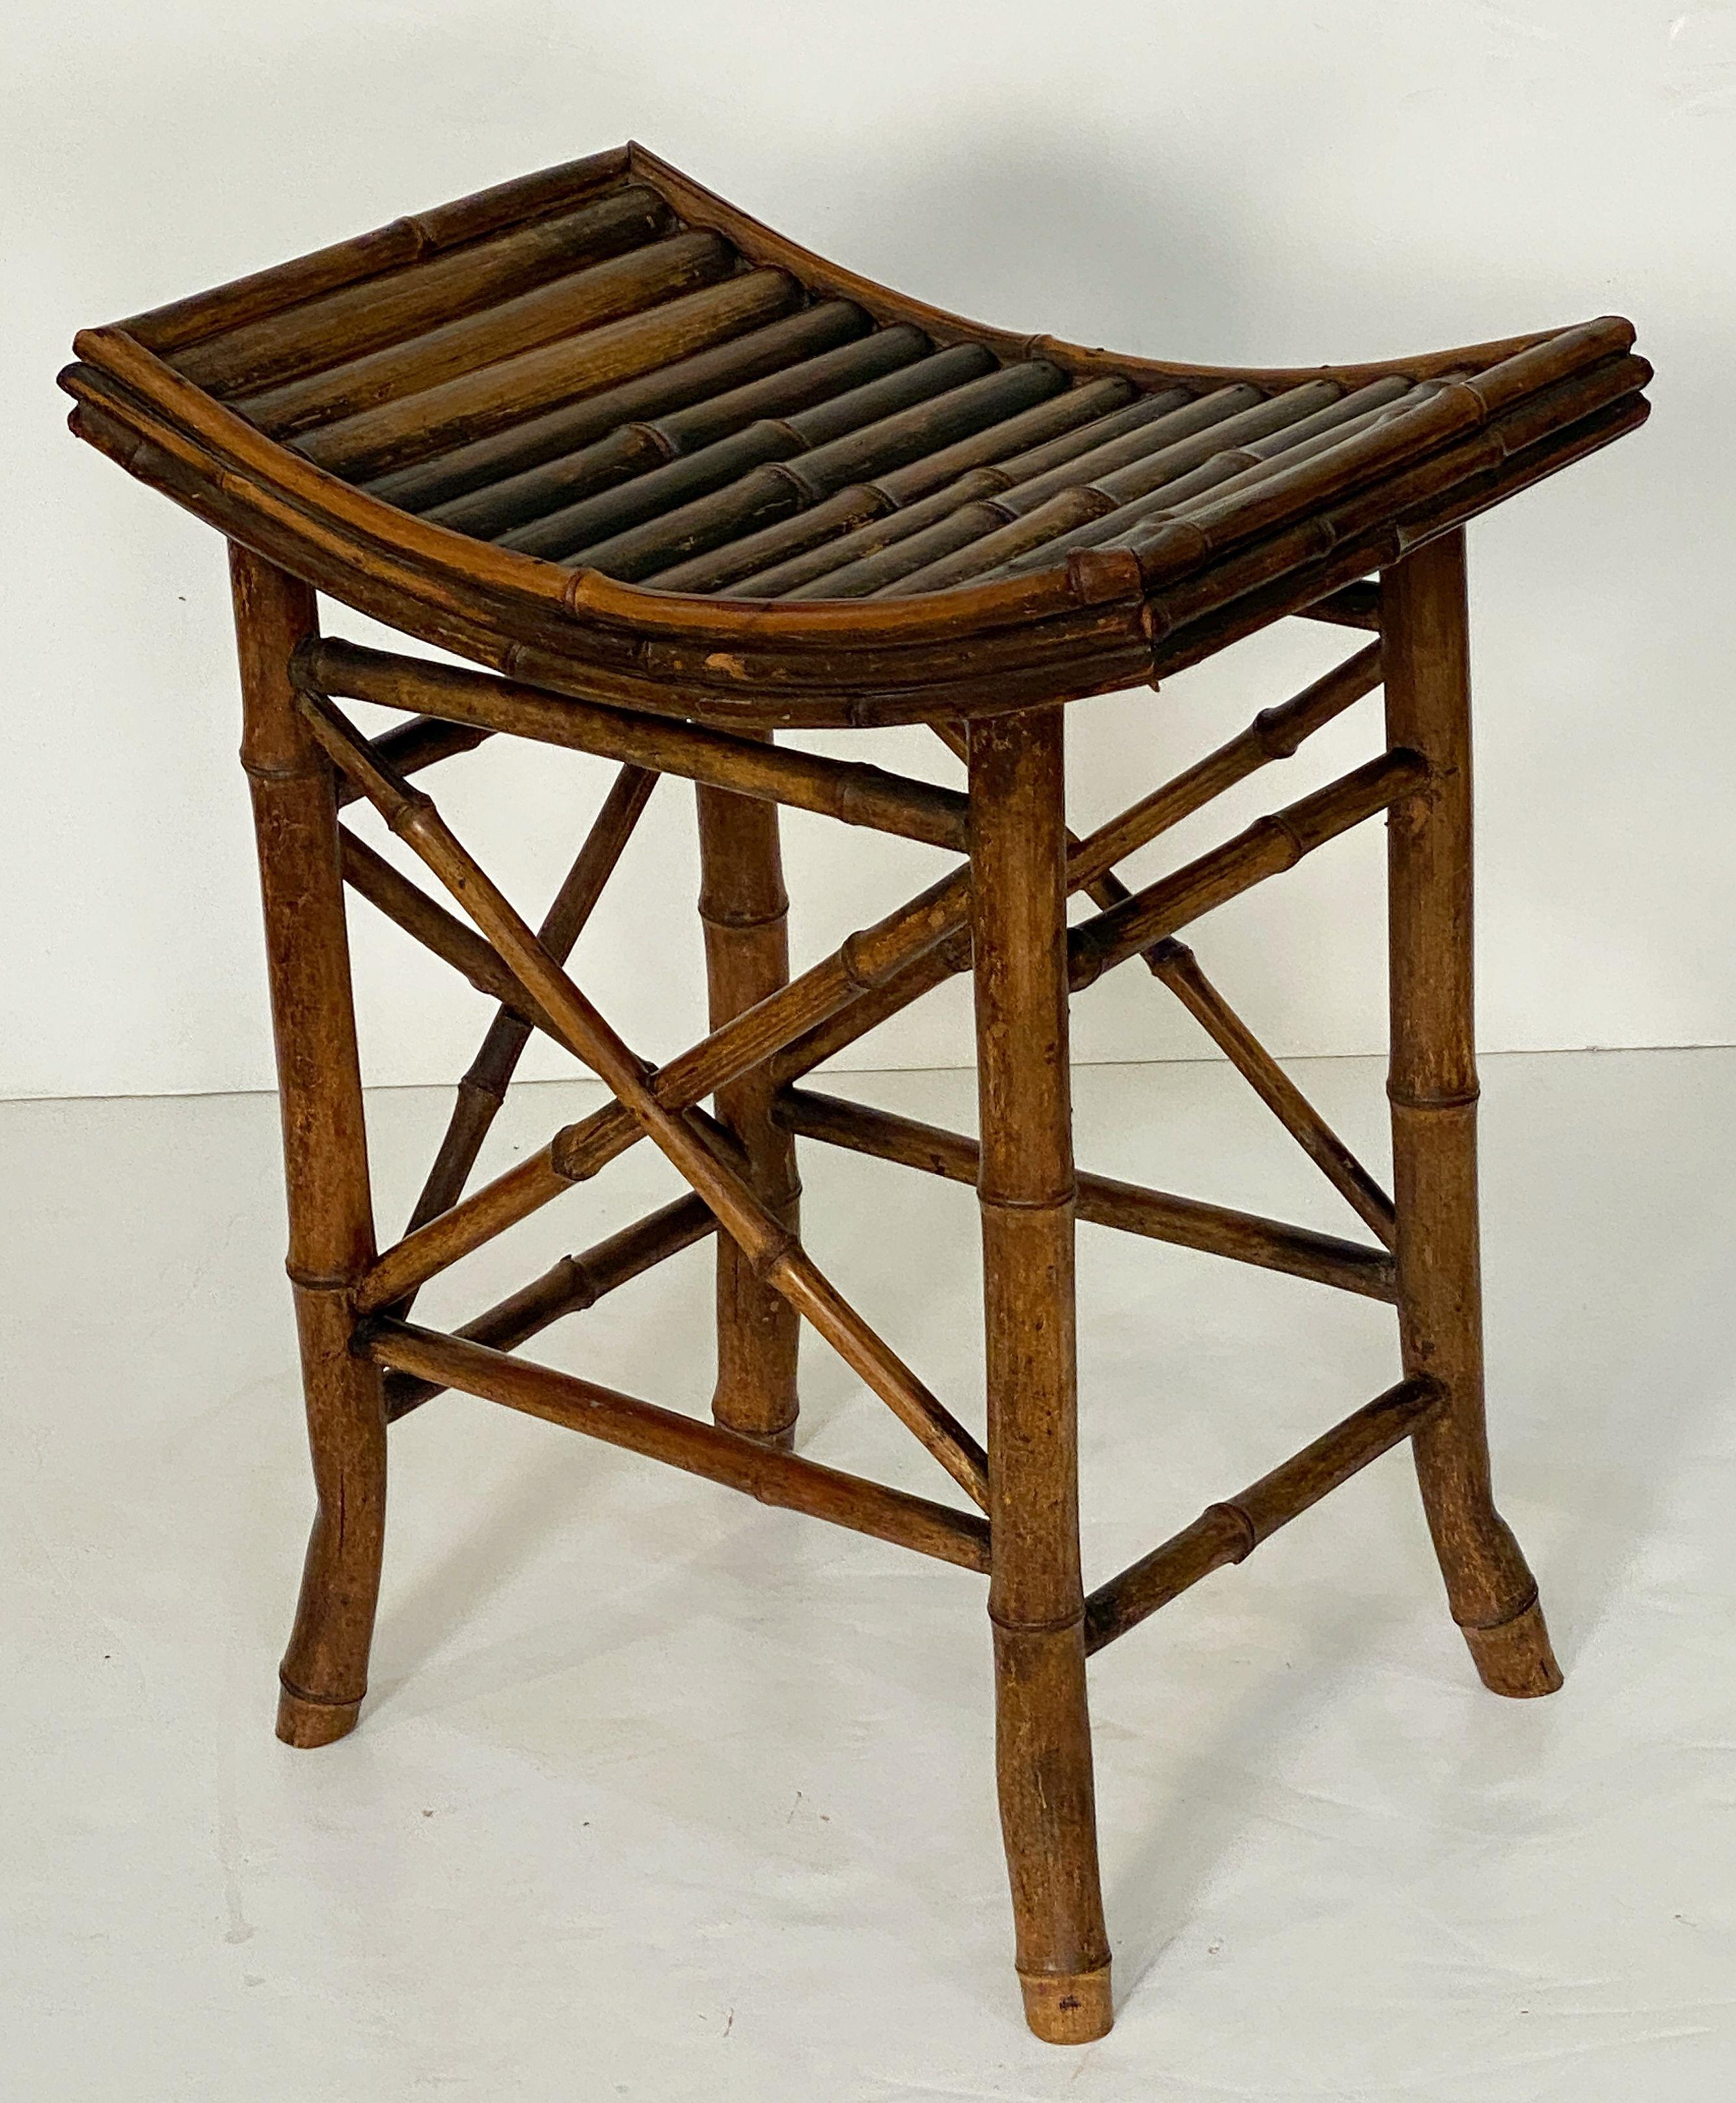 English Bamboo Bench or Stool with Saddle Seat from the Aesthetic Movement Era For Sale 6